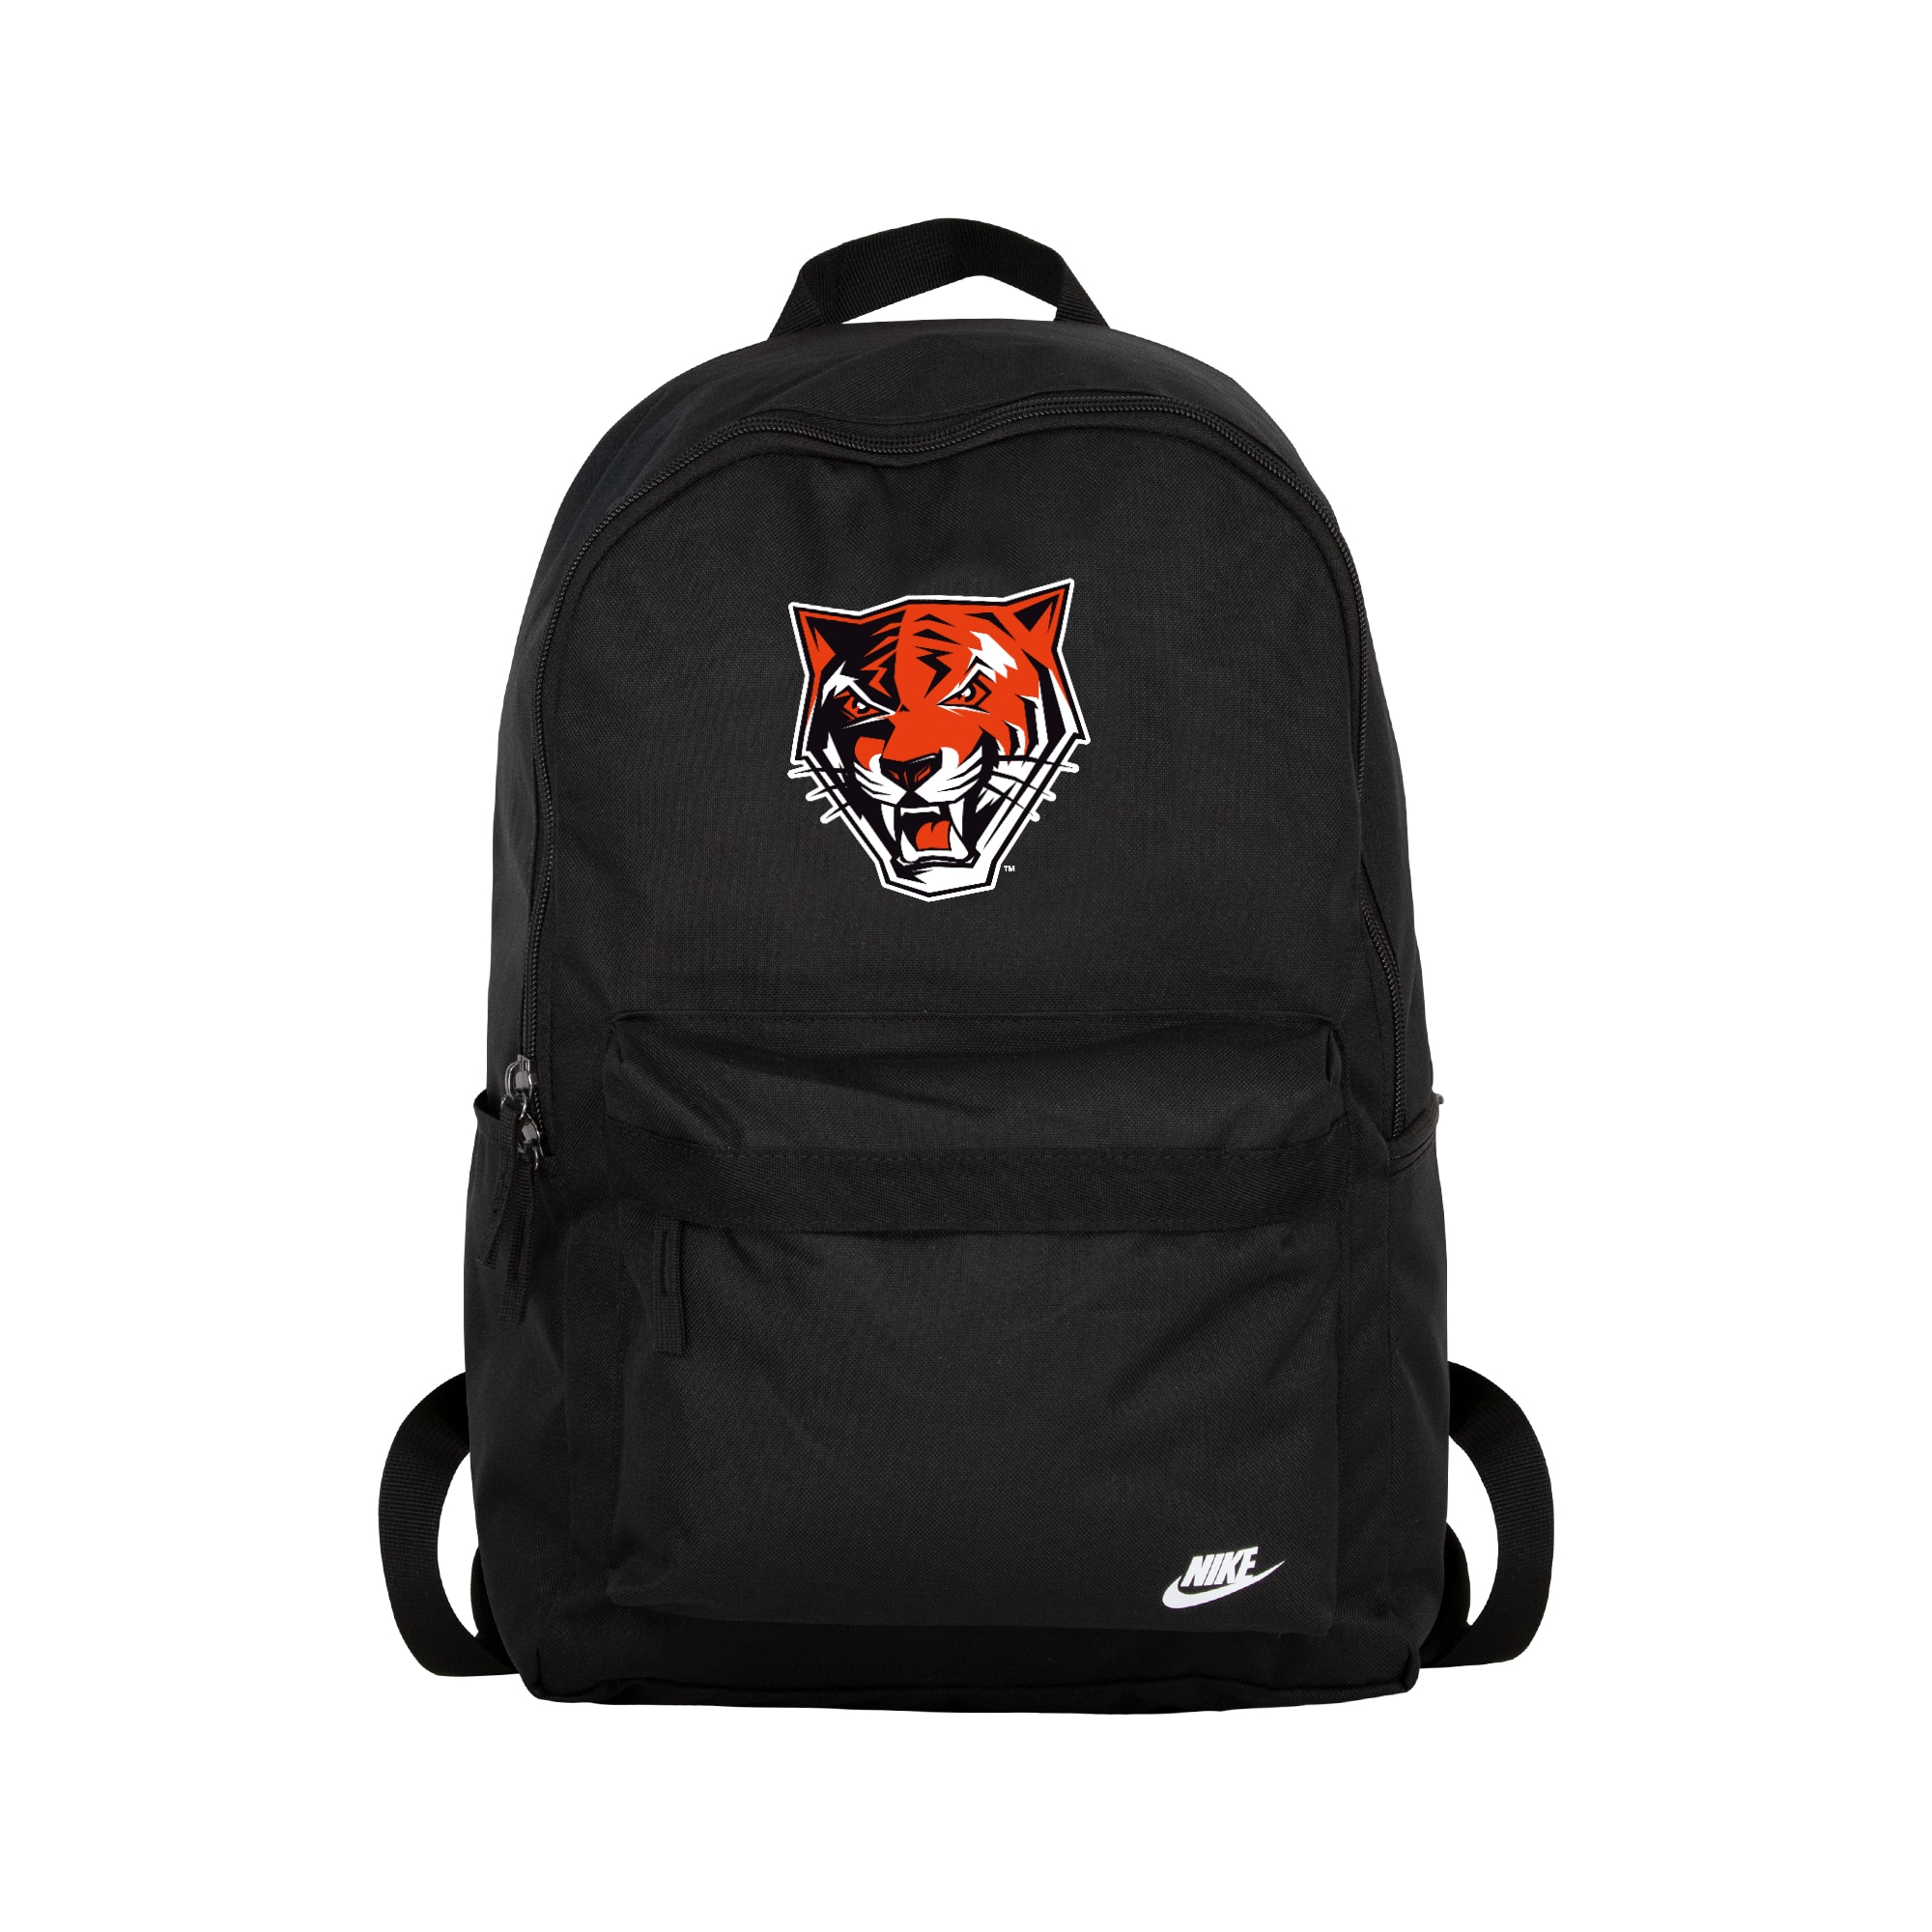 Buffalo State Heritage Backpack blk